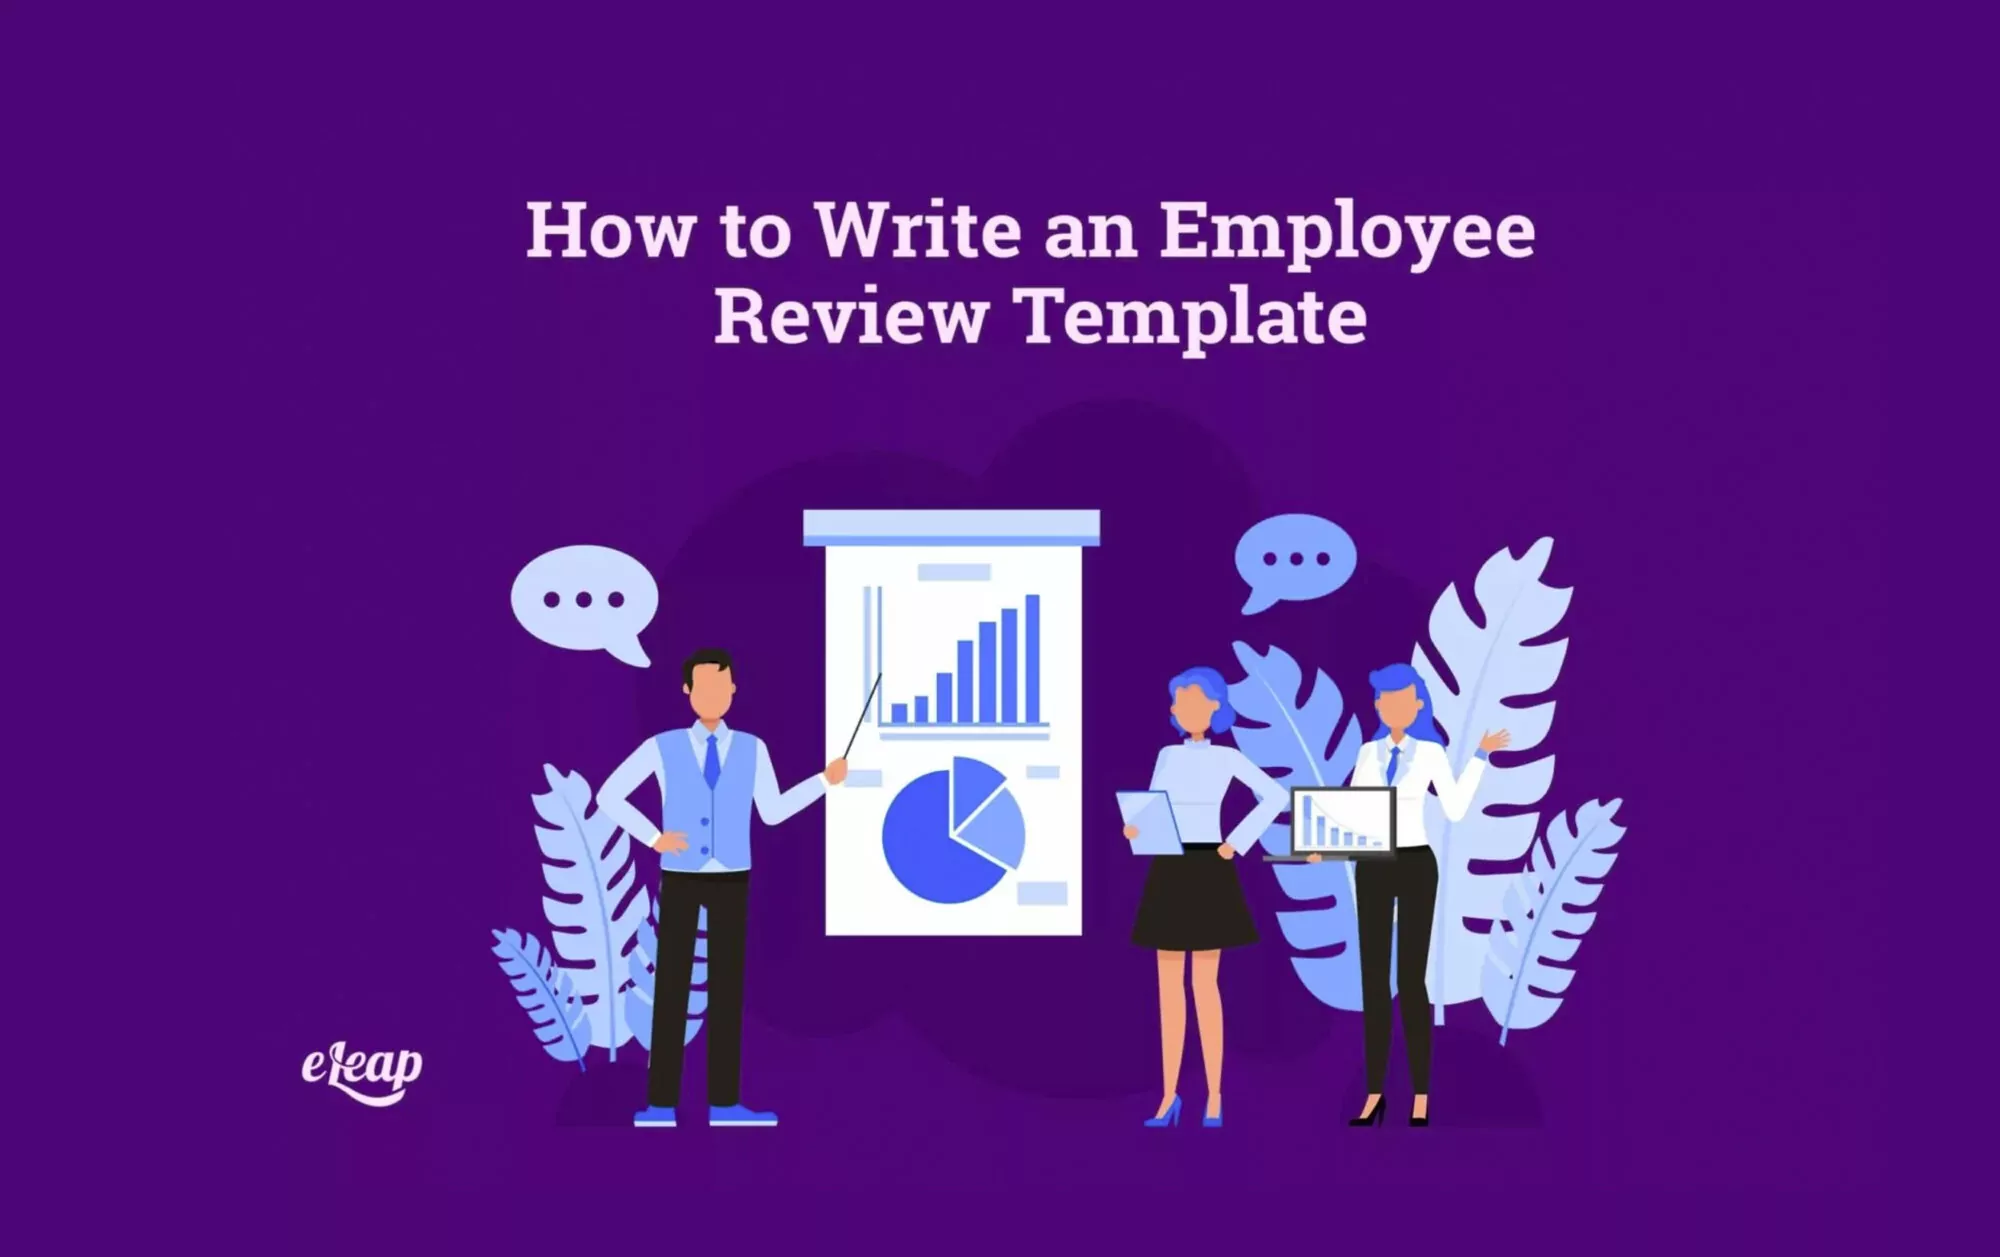 How to Write an Employee Review Template